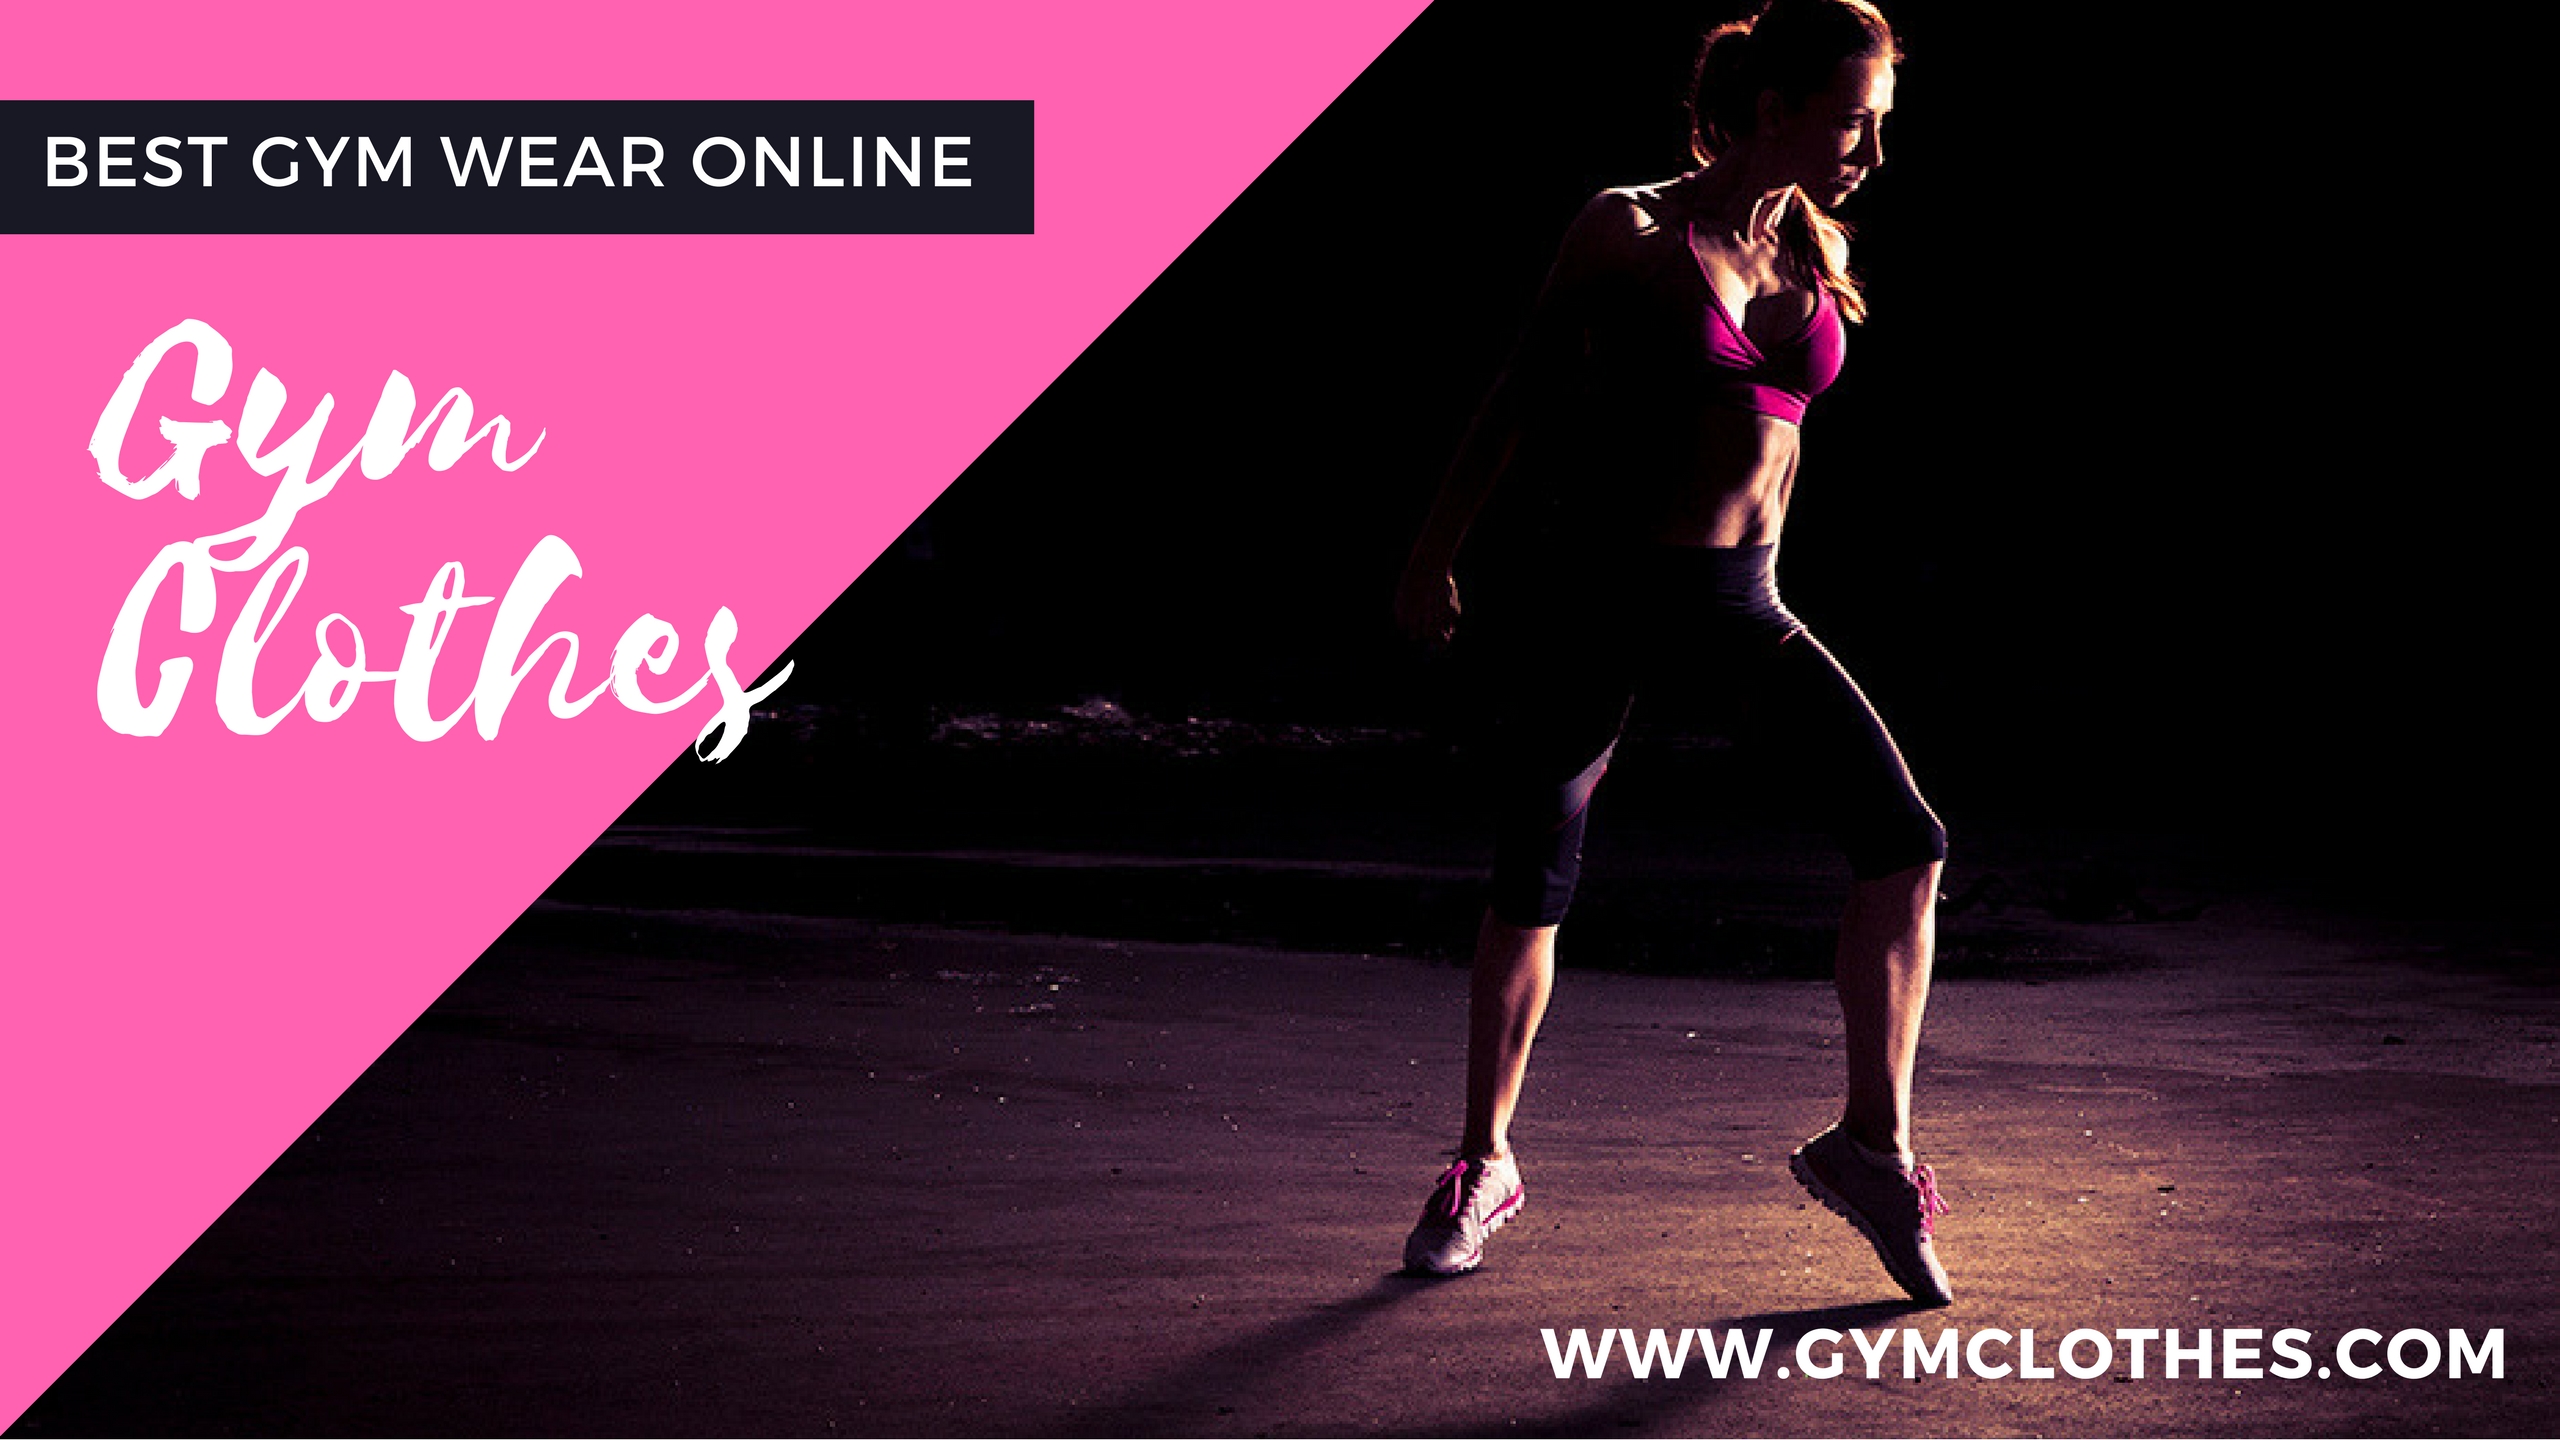 How To Look Good At The Gym In Online Gym Clothes? Here Is The Answer ...